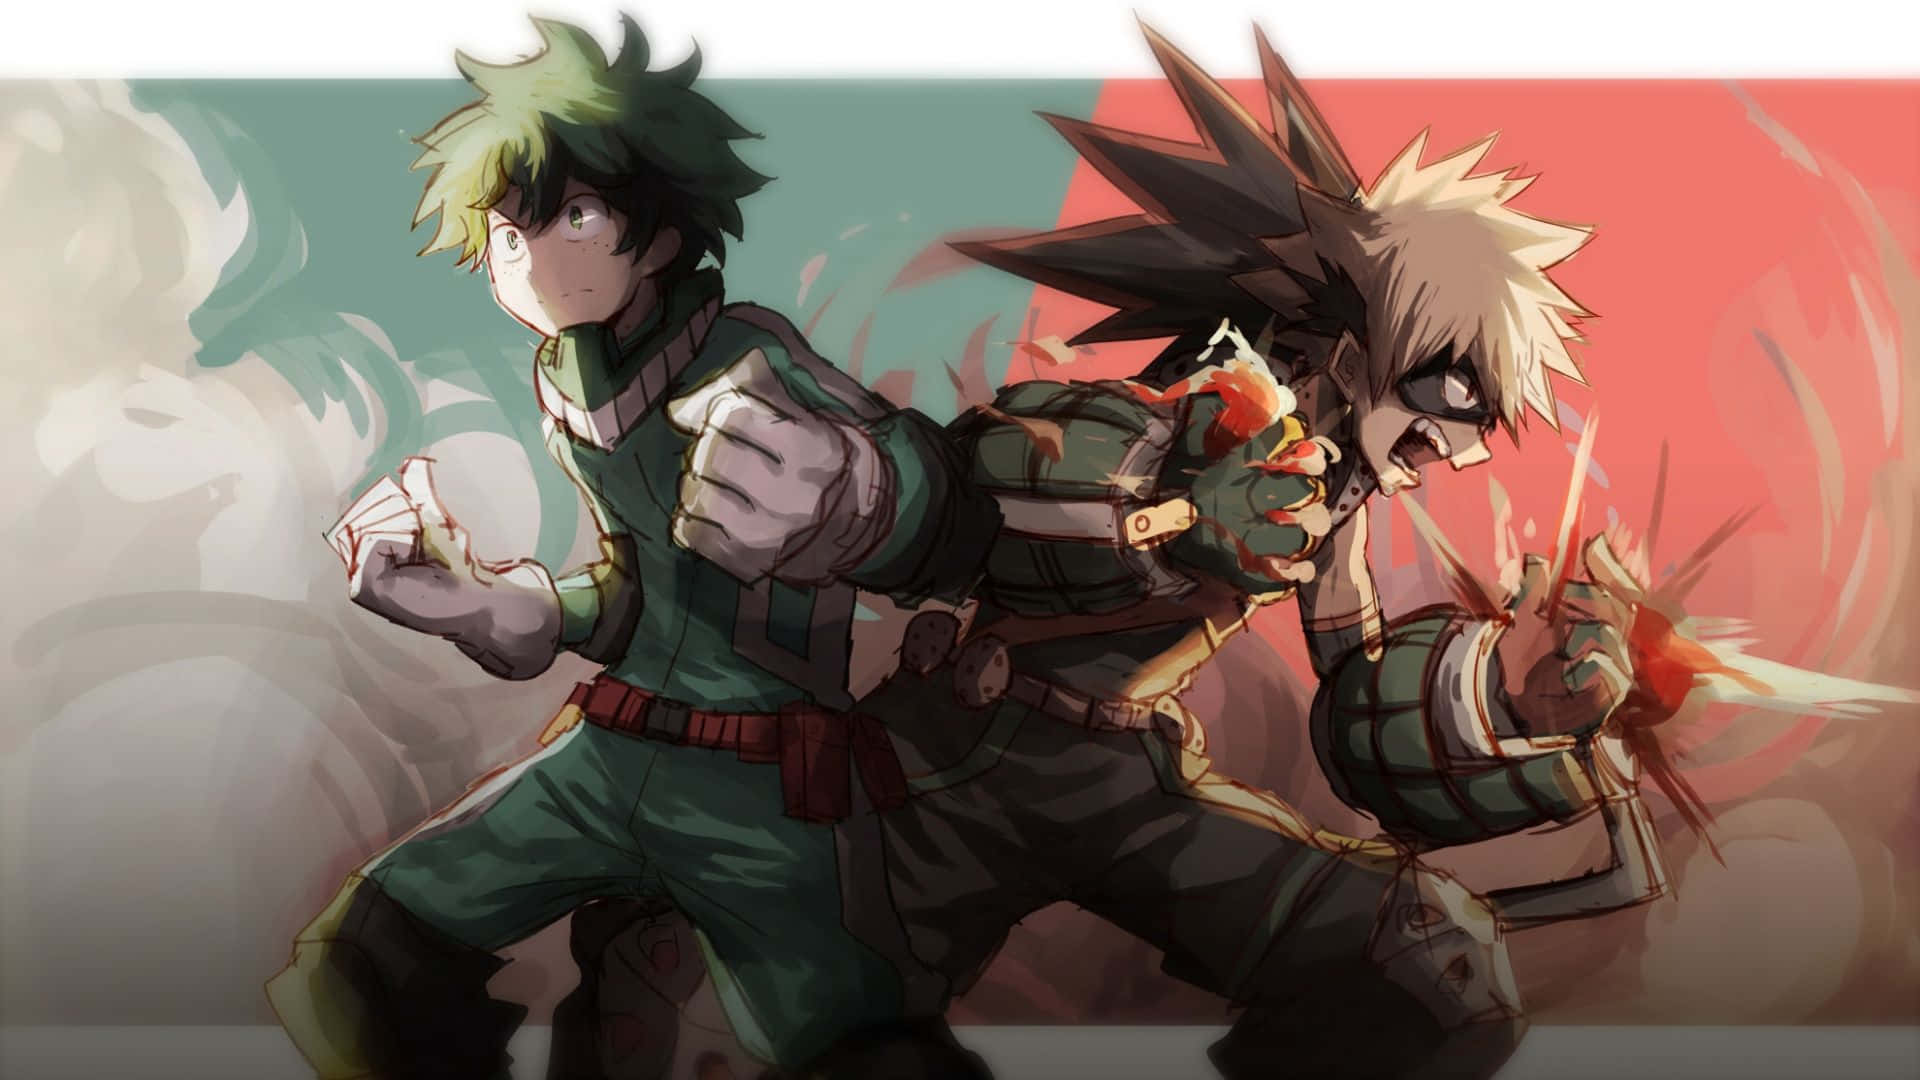 Experience Bakugou aesthetic with this amazing background! Wallpaper